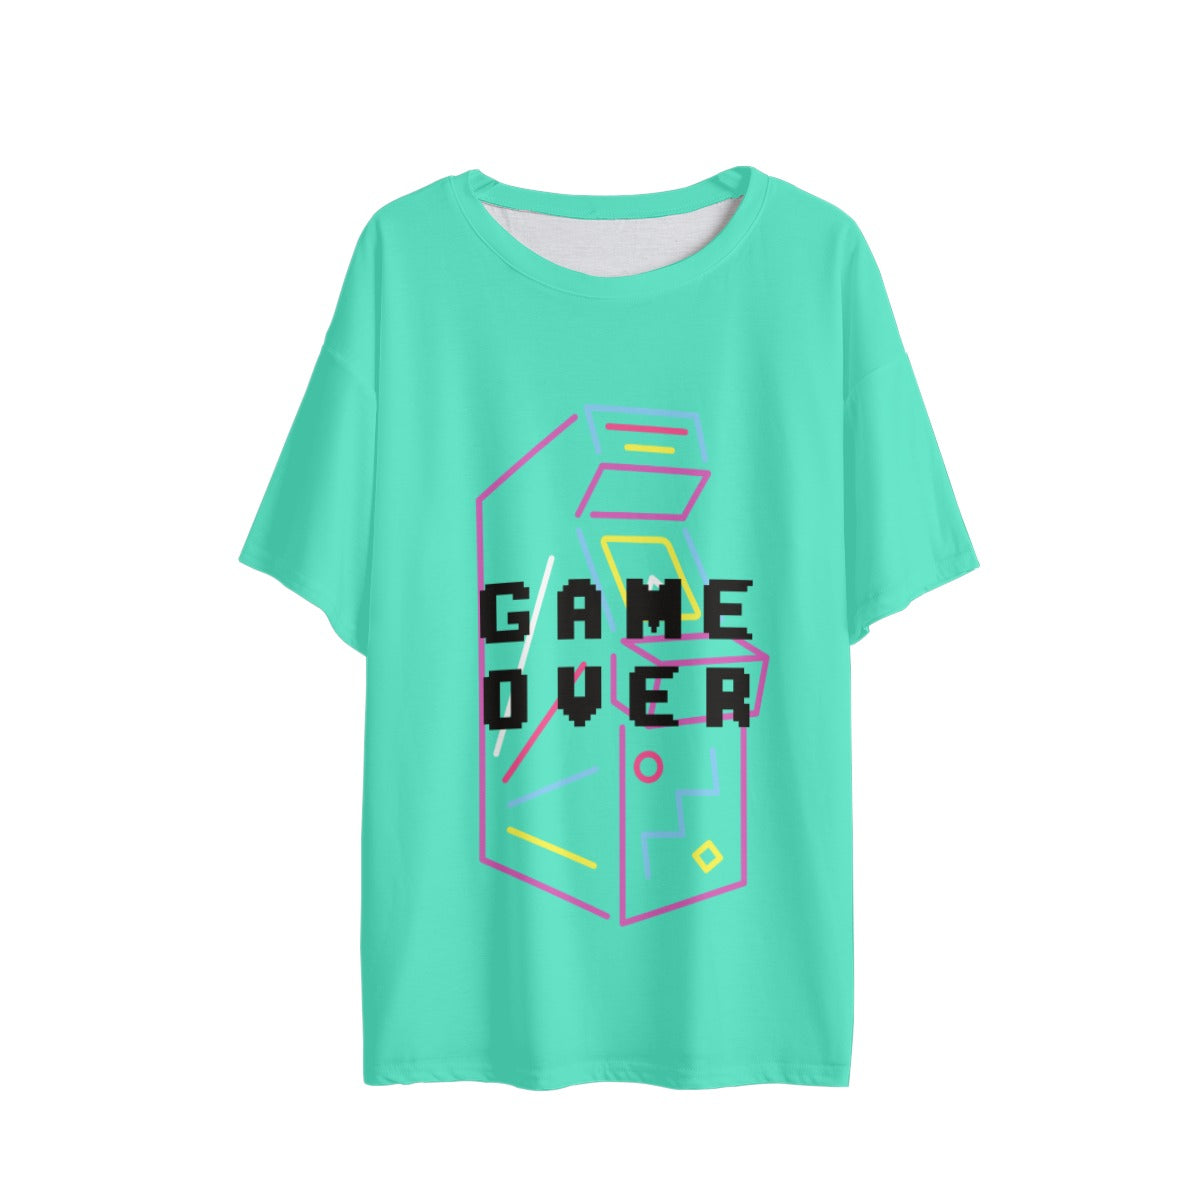 T-shirt "GAME OVER" 